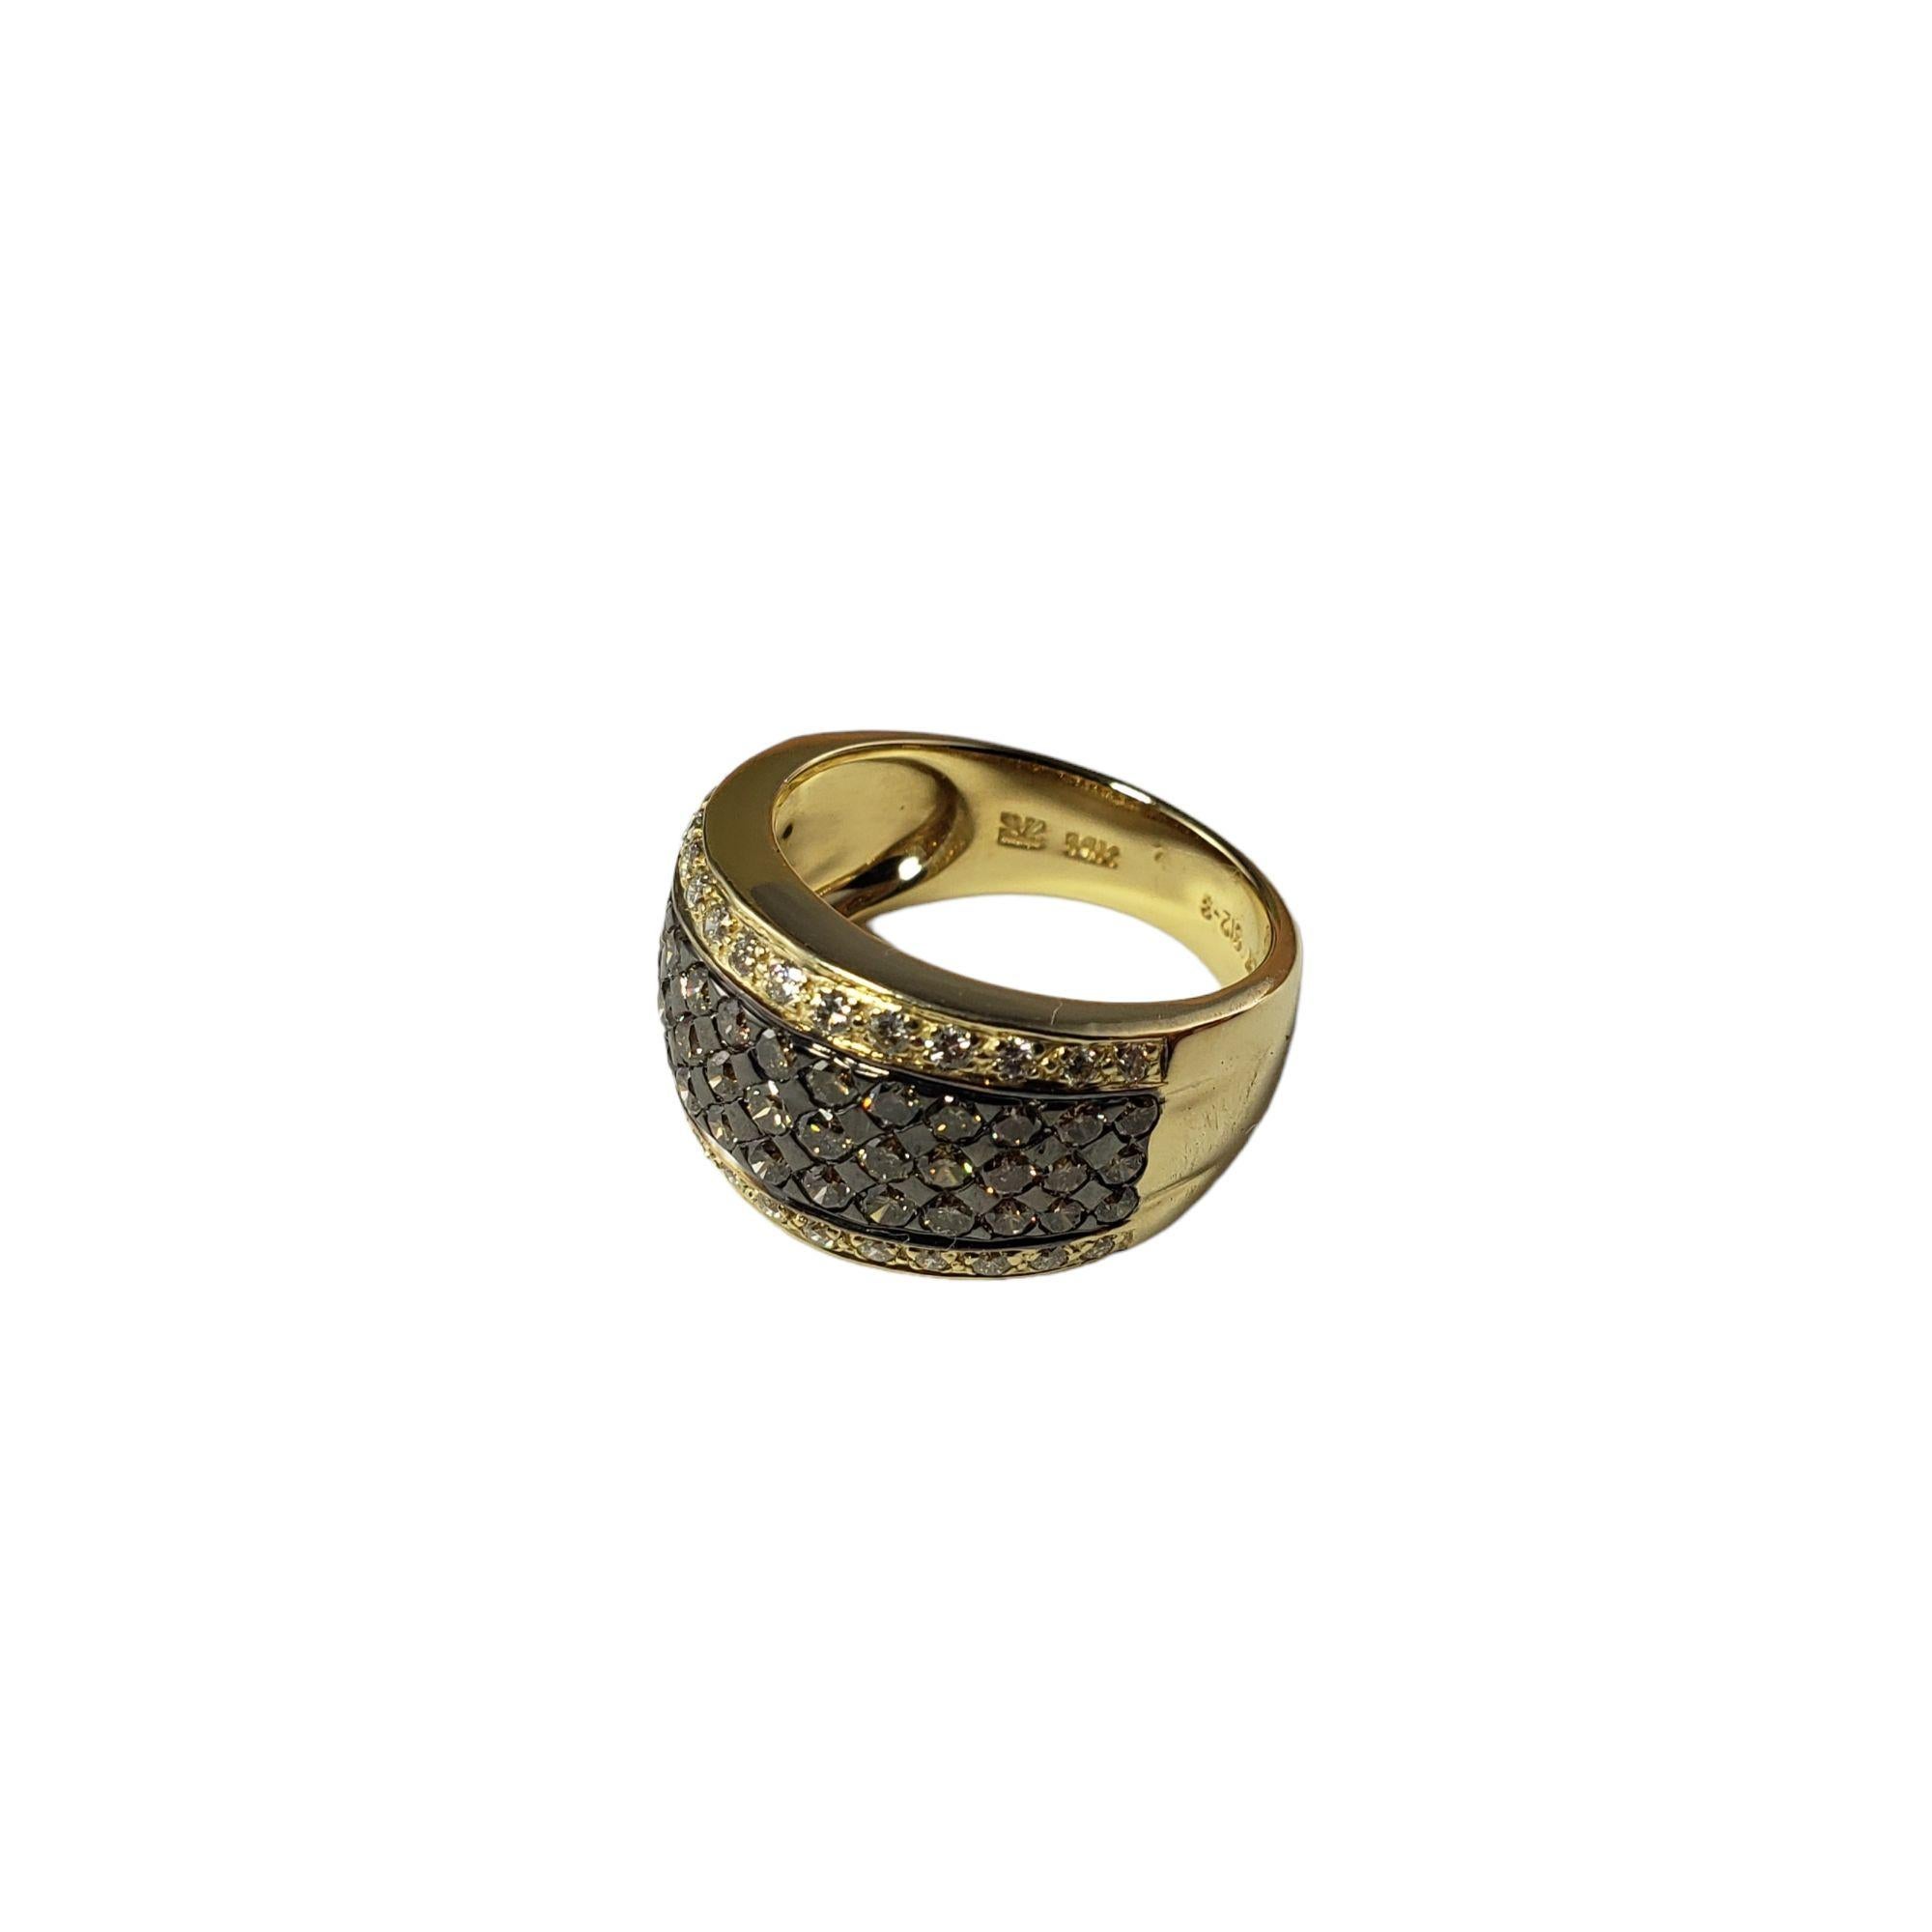 LeVian 14 Karat Yellow Gold Chocolate and White Diamond Band Size 7-

This sparkling ring features 45 round brown diamonds and 105 white diamonds set in beautifully detailed 14K yellow gold. Width: 12 mm.
Shank: 5 mm.

Approximate total diamond